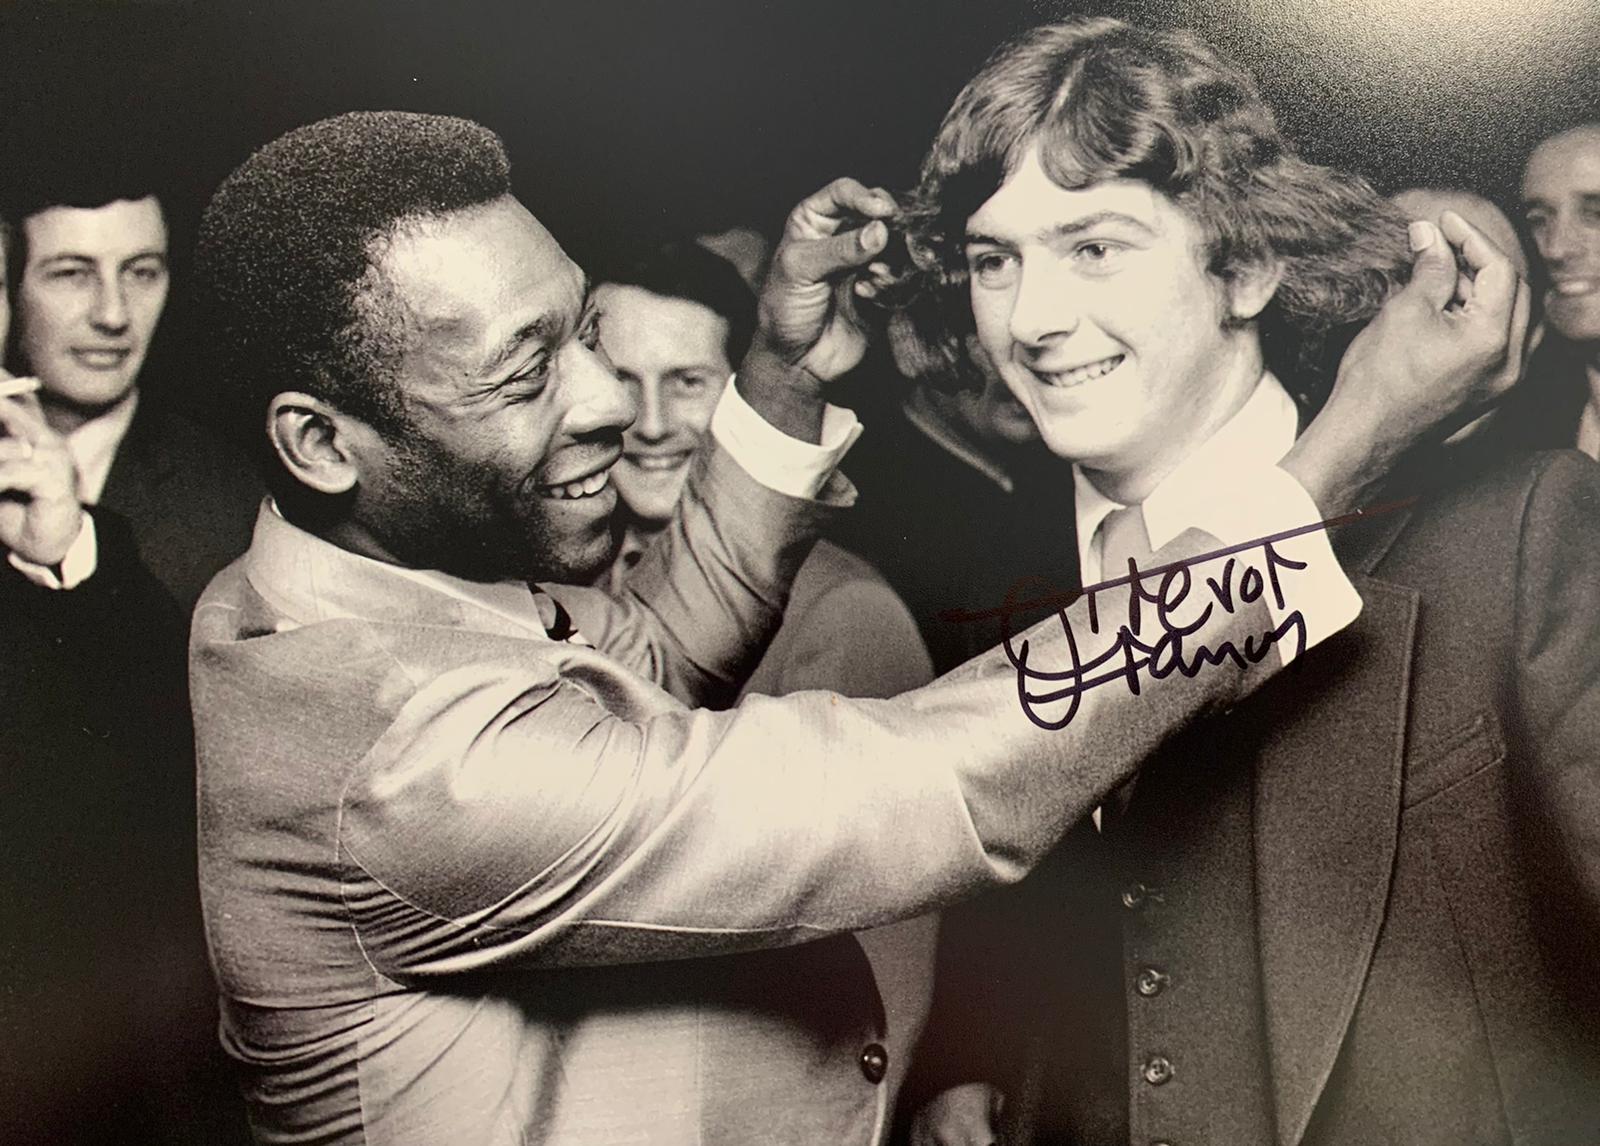 REDUCED TODAY ONLY! Trevor Francis Signed Photo meeting Pele - Available in 2 Sizes